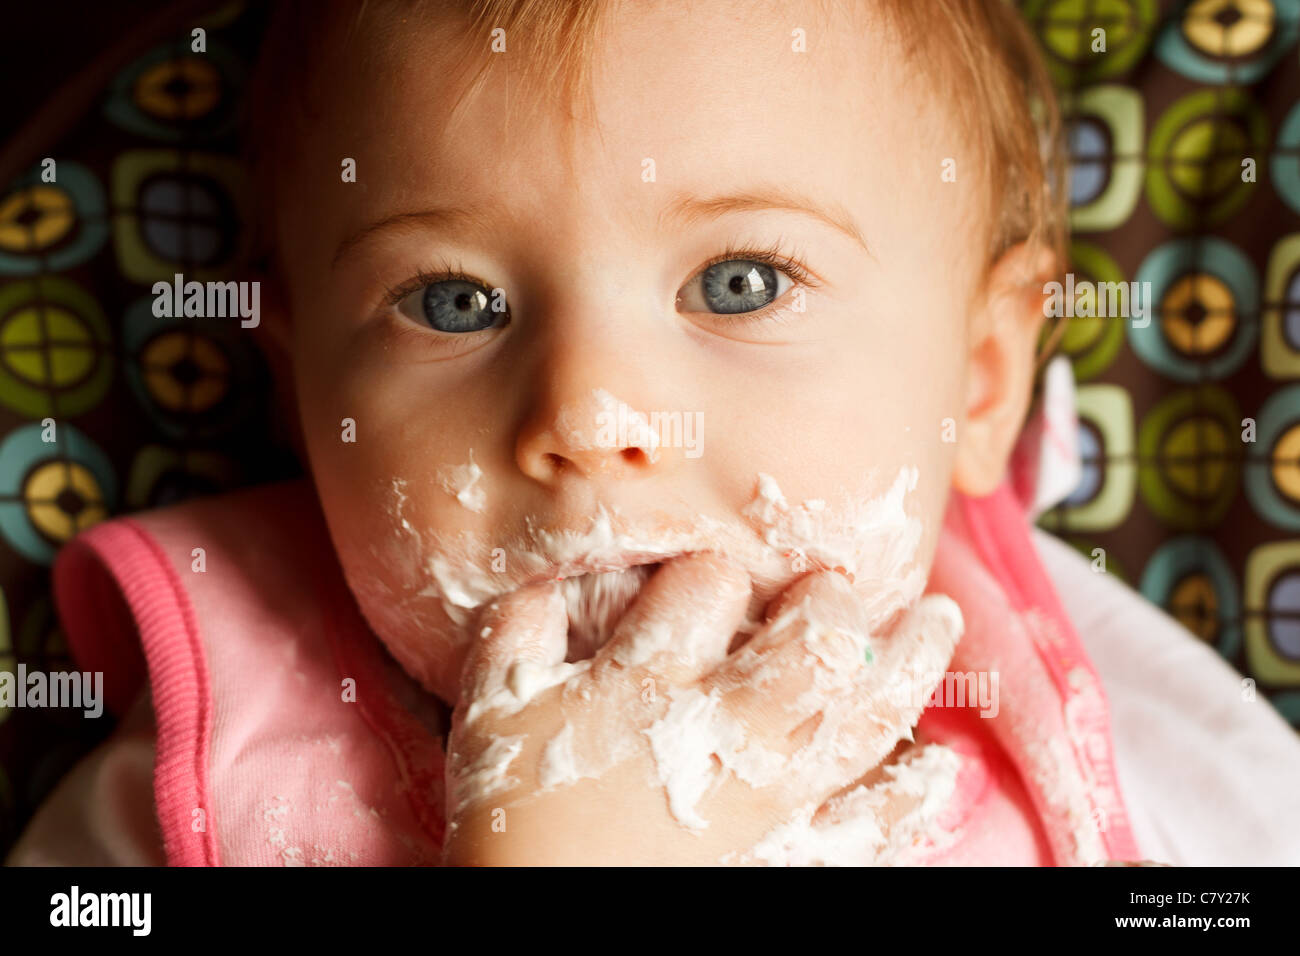 Baby girl making a mess while feeding herself cake Stock Photo